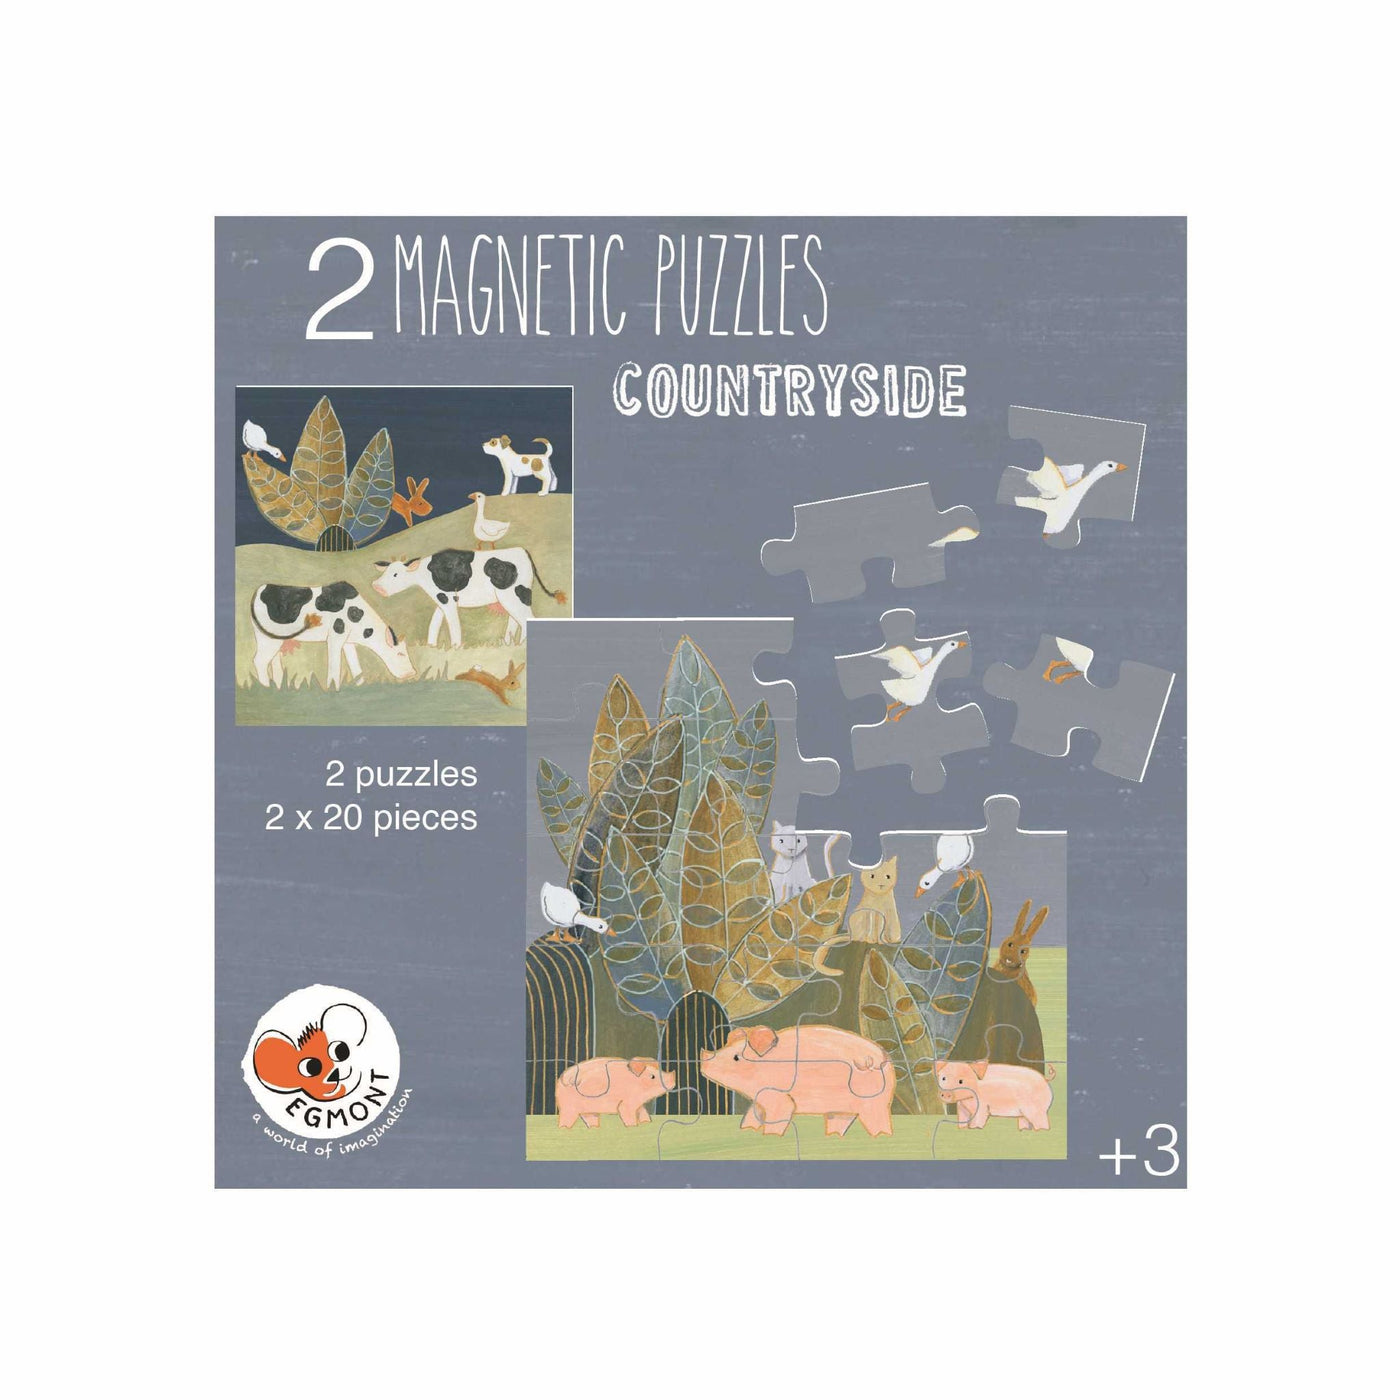 Magnetic Puzzle Countryside